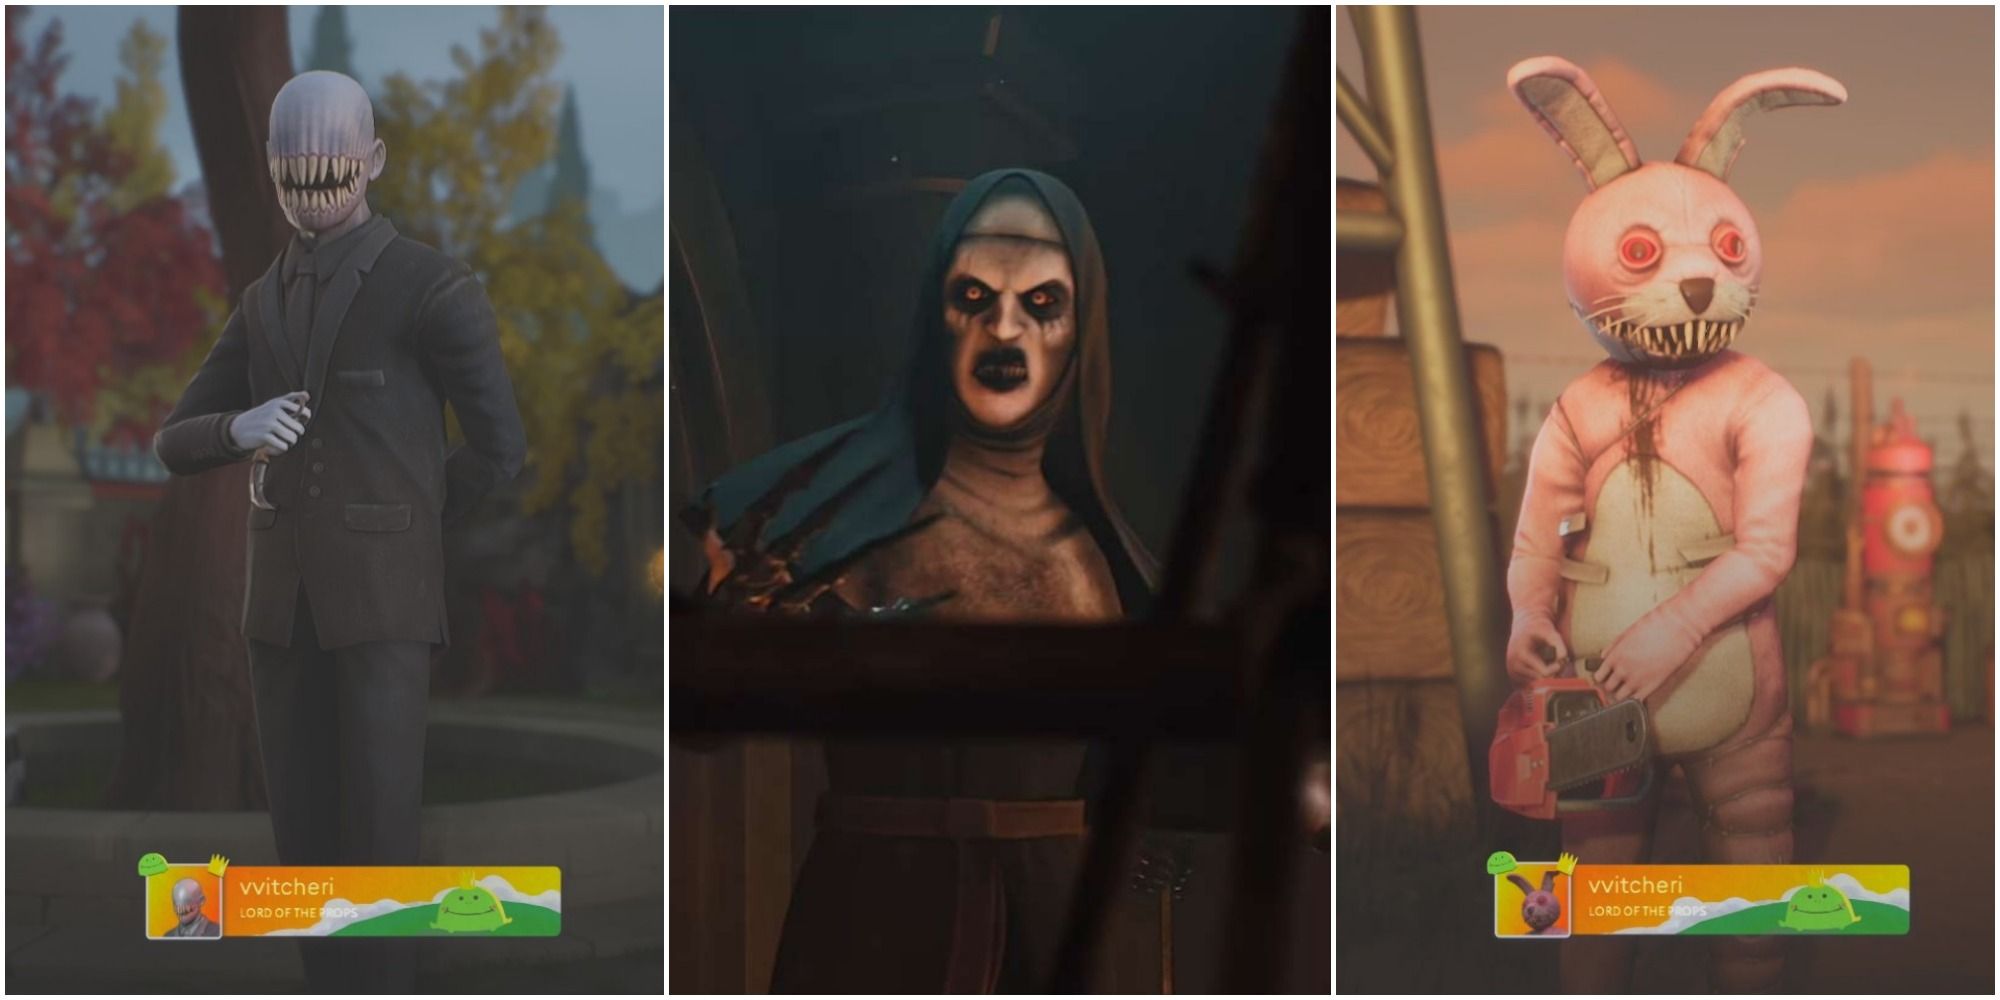 Split image of Imposter in Abbey, Banshee in Abbey, and Igor in the Farm, from left to right